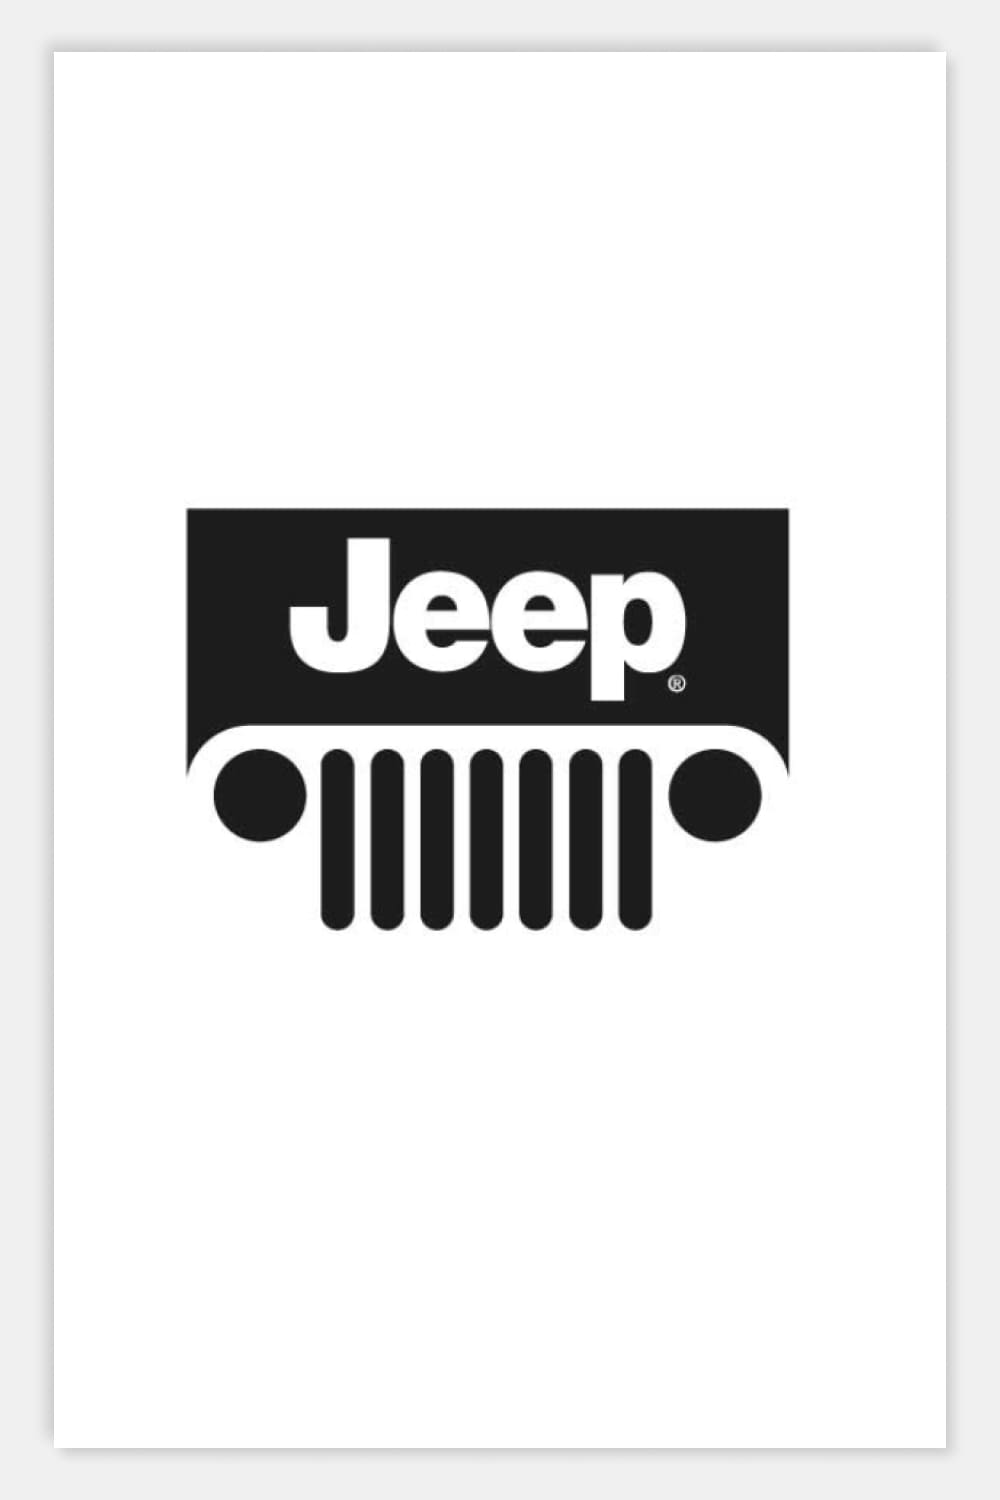 Jeep Wrangler grille silhouette in full face and Jeep logo.